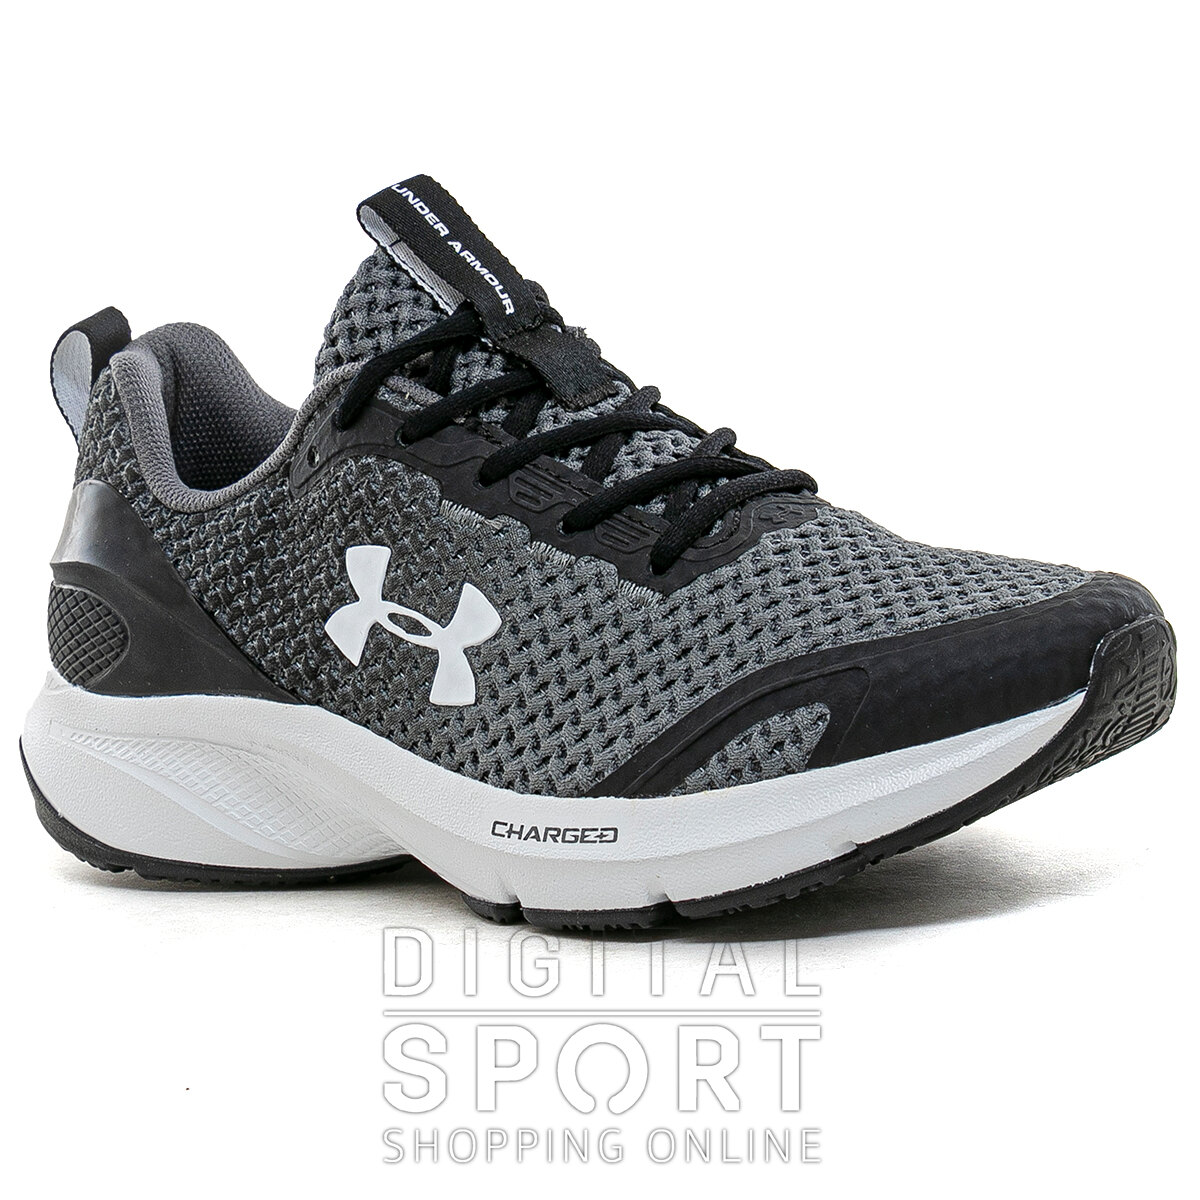 Arco iris Plano Culpable ZAPATILLAS CHARGED PROMPT UNDER ARMOUR | DIGITAL SPORT